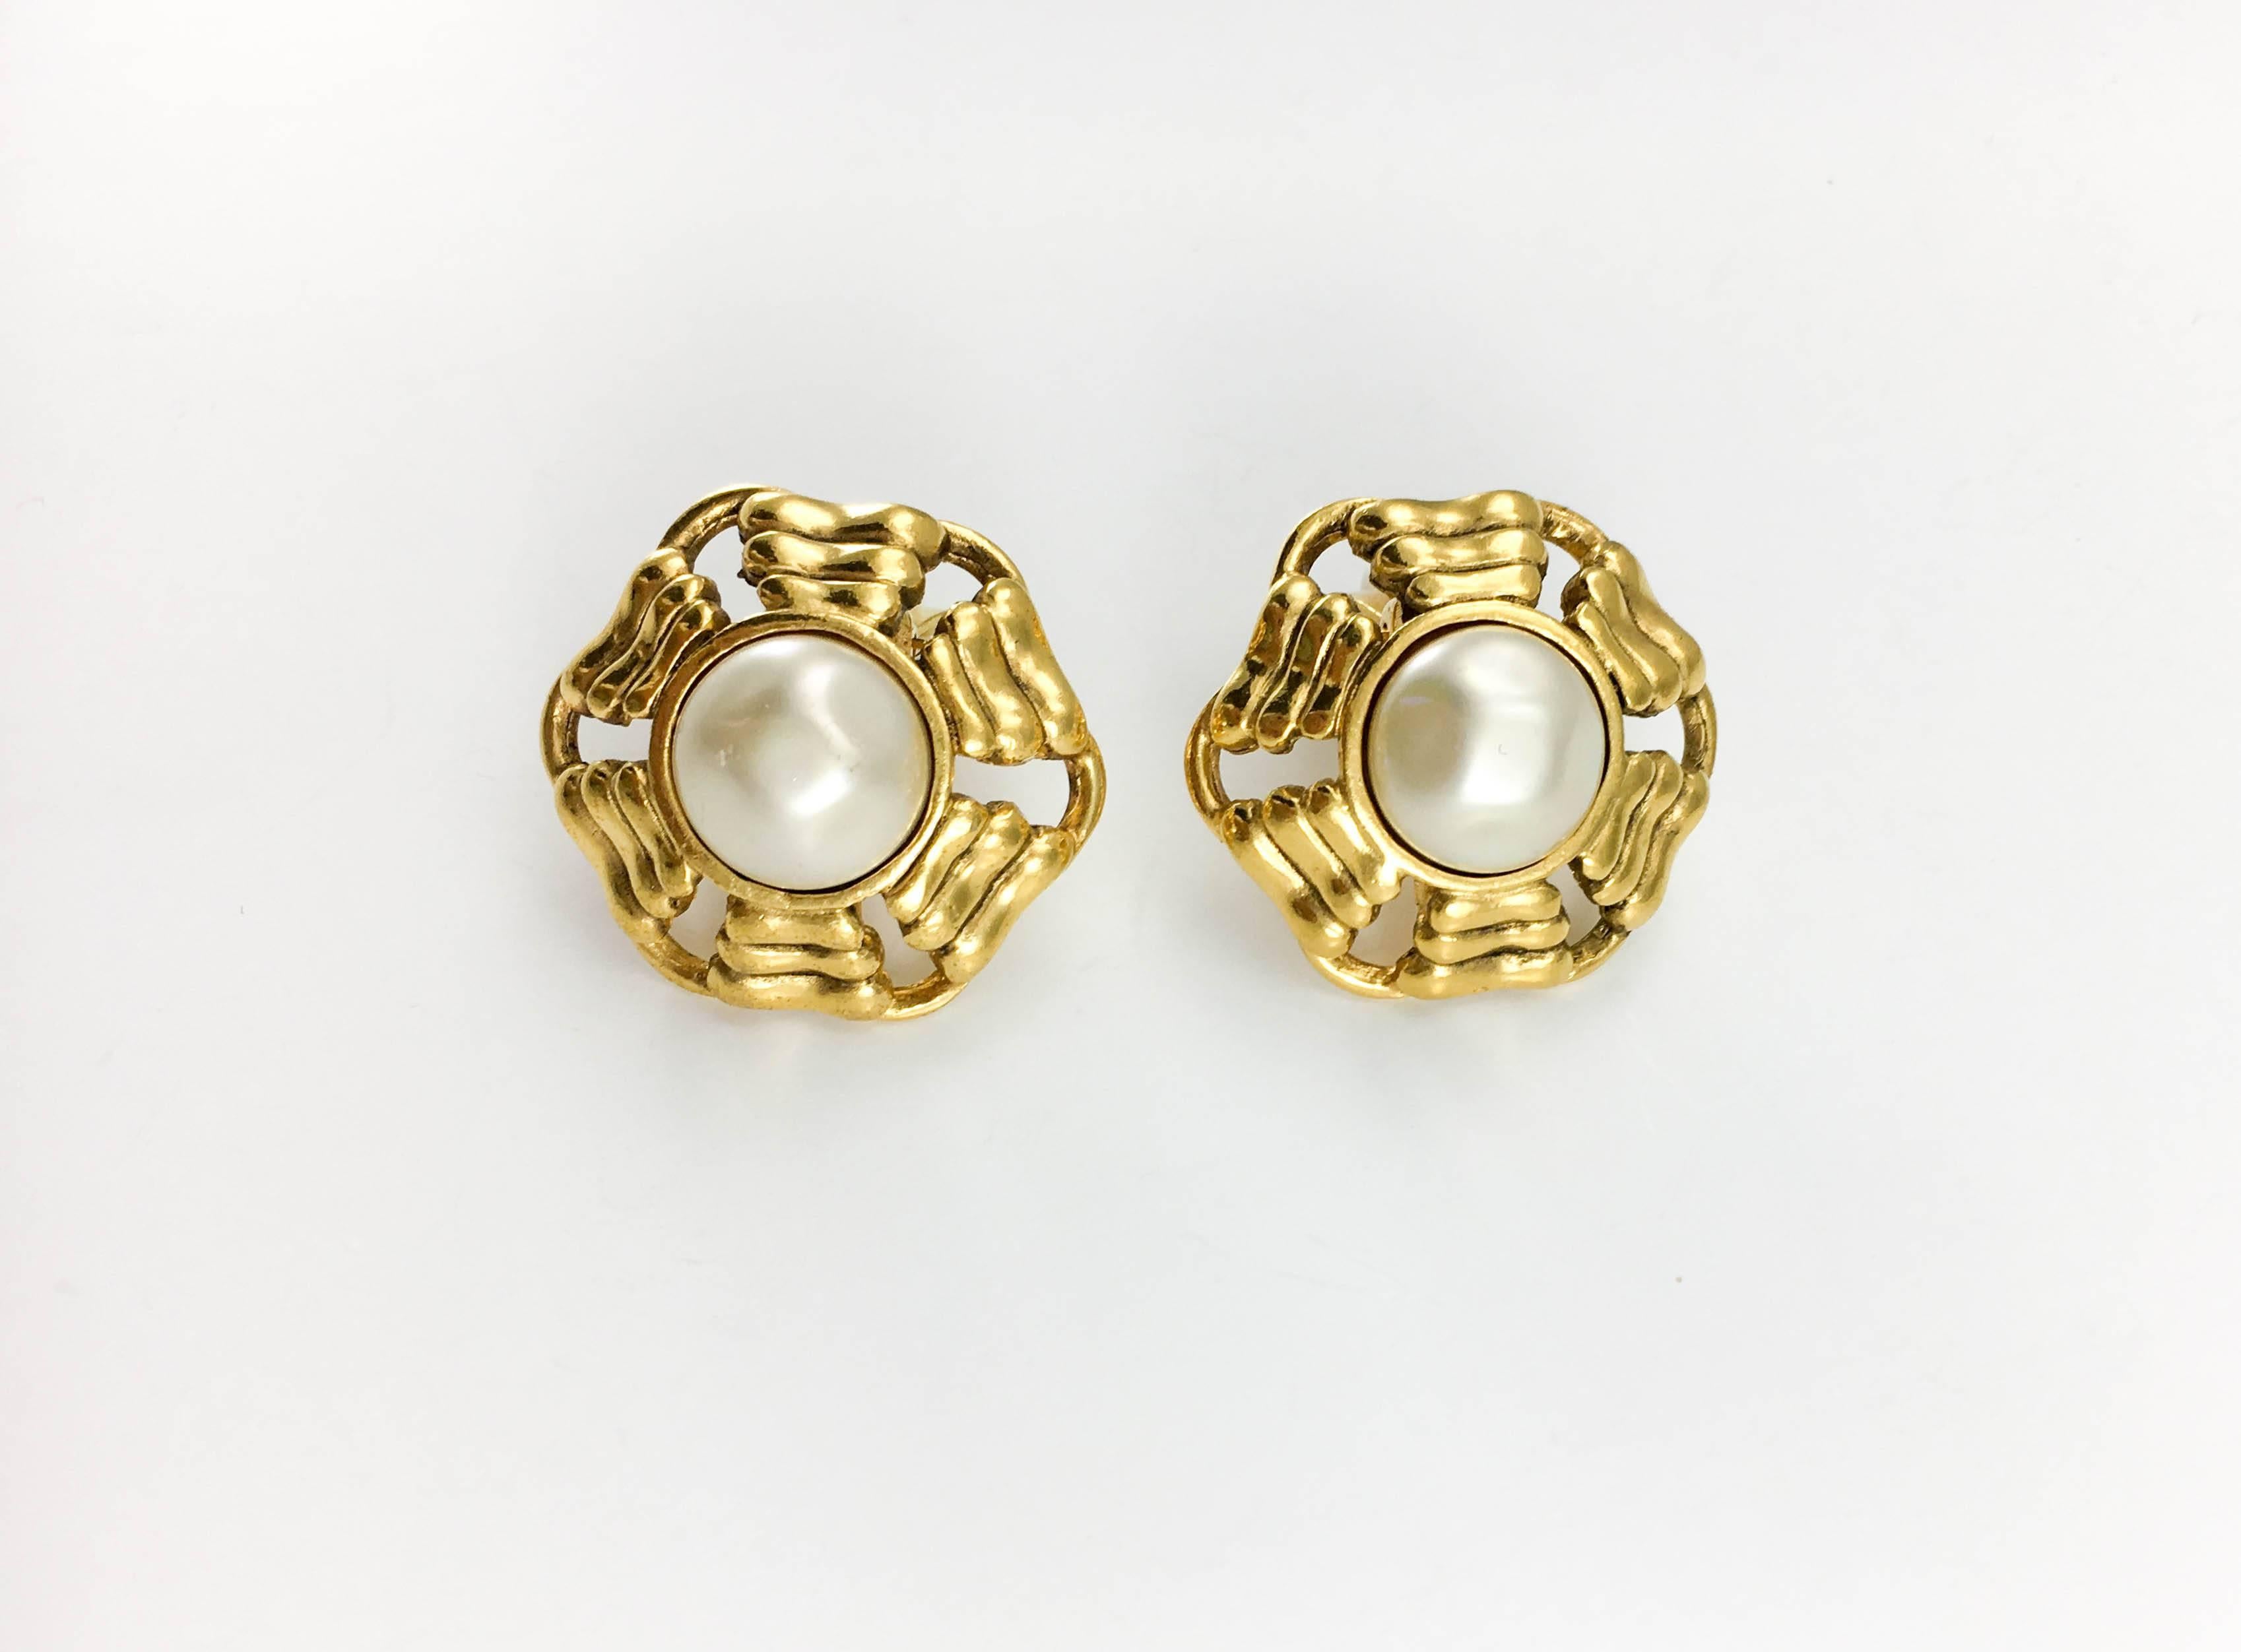 Chanel Gold-Plated Round Pearl Earrings, 1980s   In Excellent Condition For Sale In London, Chelsea